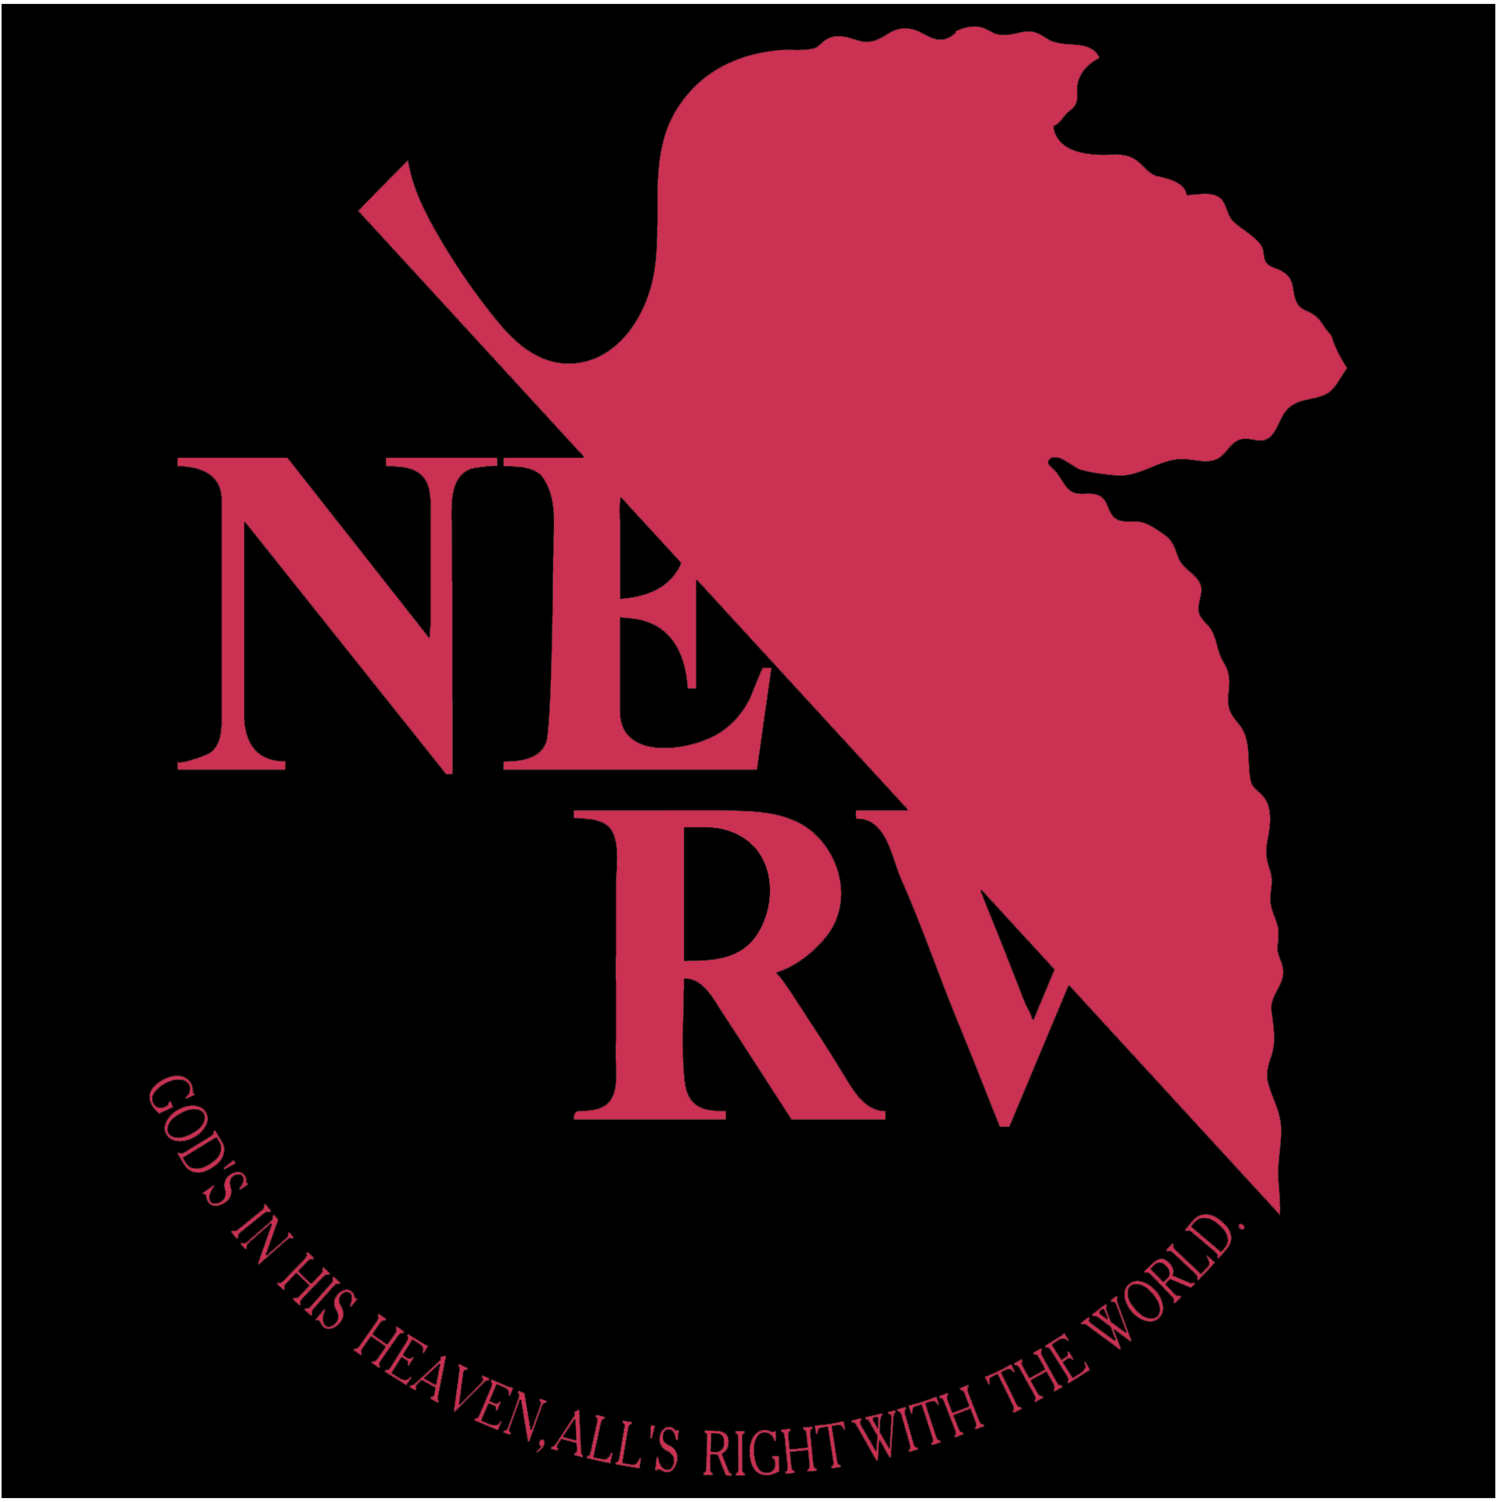 The anime series Neon Genesis Evangelion is iconic for its graphic design, featuring striking use of color, distorted fonts , title cards, and character design. Red/​black is associated with the main character Asuka Langley Soryu, but two other examples employ red-on-black to iconic effect: the NERV logo, and the SEELE “monoliths” (video conferencing UI design).